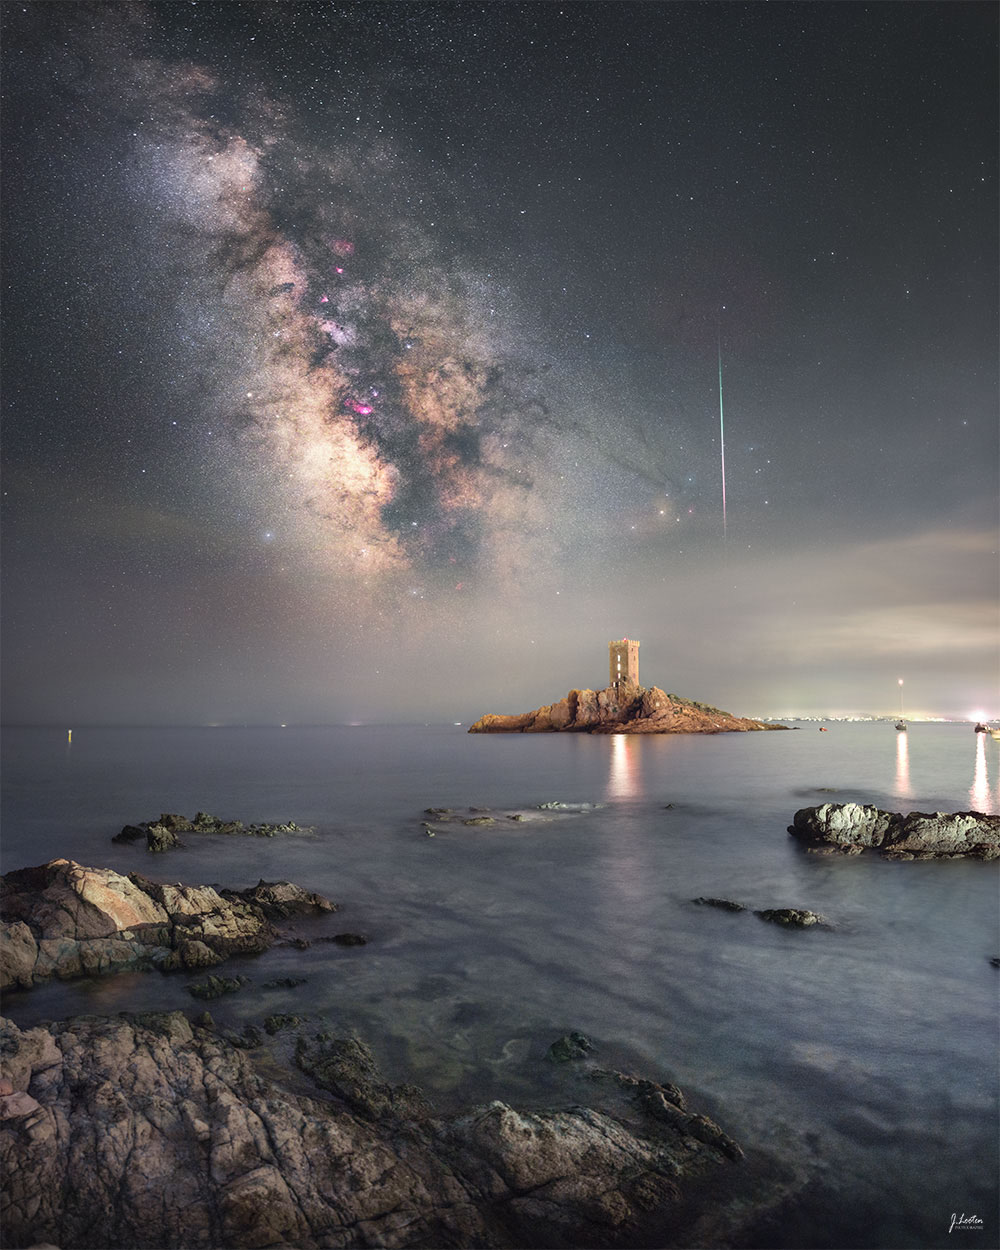 The featured image shows a beach nighscape featuring a bright meteor,
the band of our Milky Way Galaxy, and a small island in the 
Mediterranean Sea of France.
Please see the explanation for more detailed information.